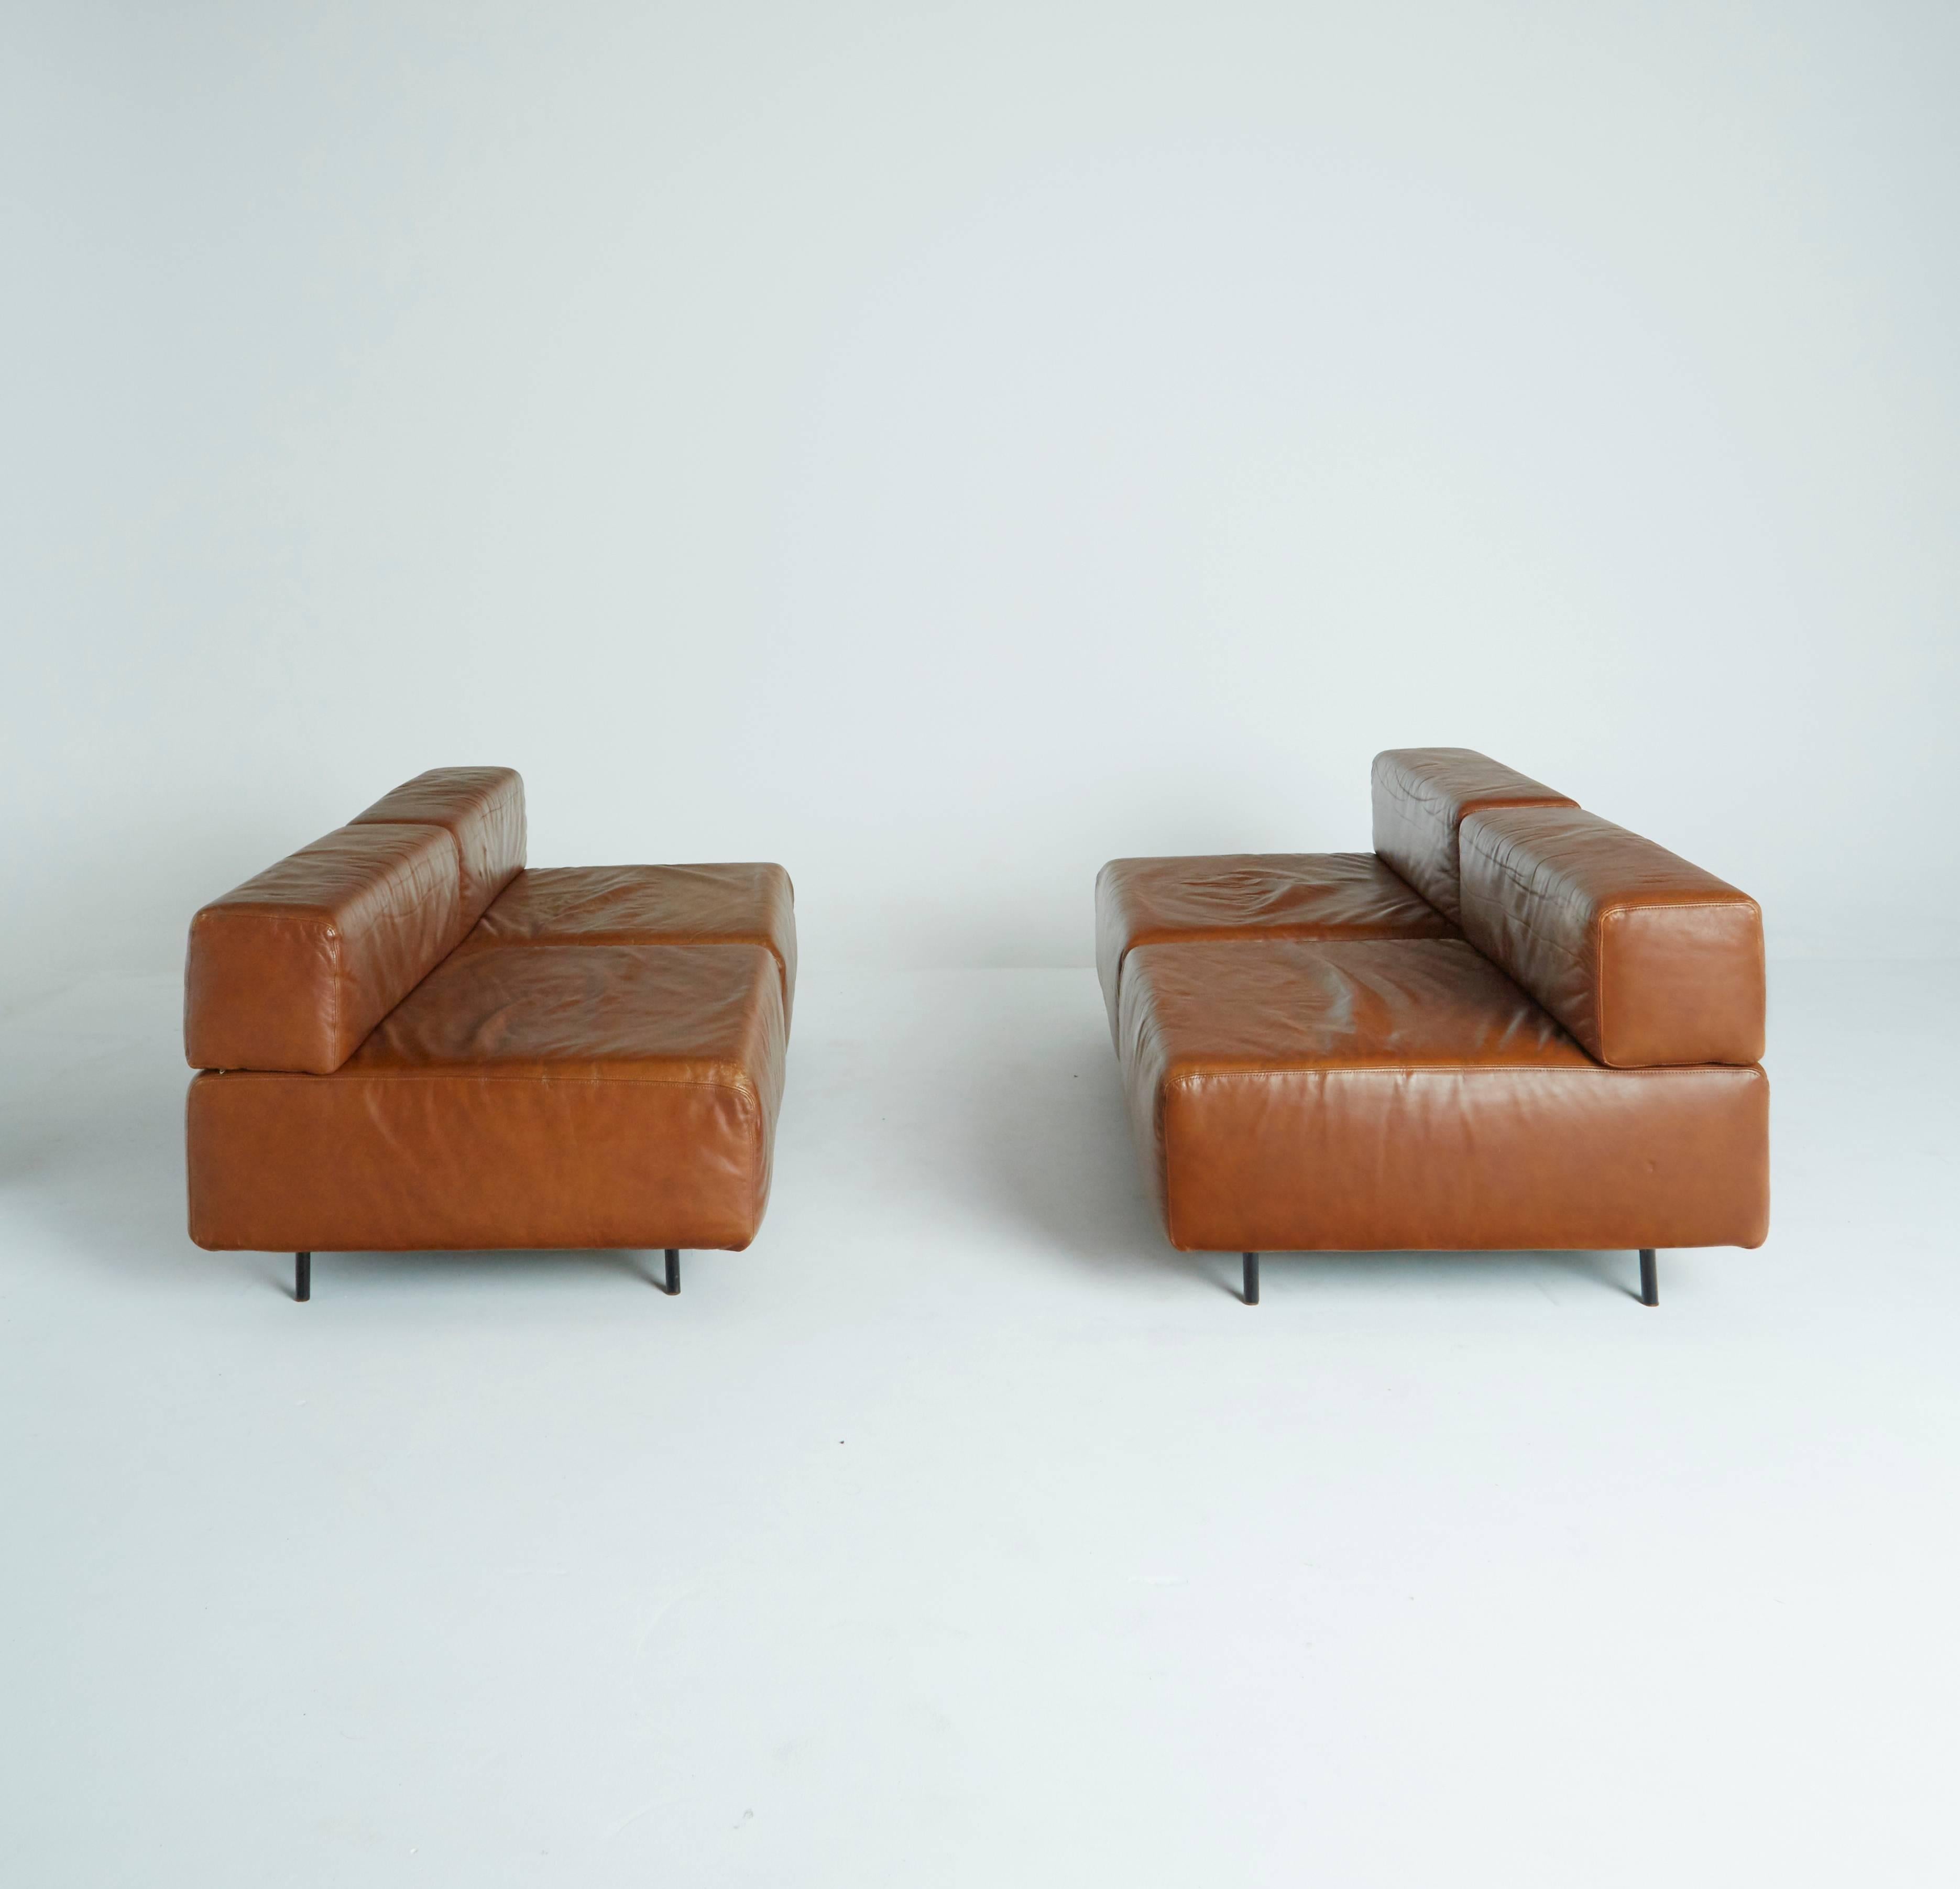 Designed by Harvey Probber, circa 1960, this set of 4 modular seating components can be arranged in endless ways around the room. The tan leather upholstery and low, relaxed stature make this lounge seating the epitome of cool.

Arrange the pieces